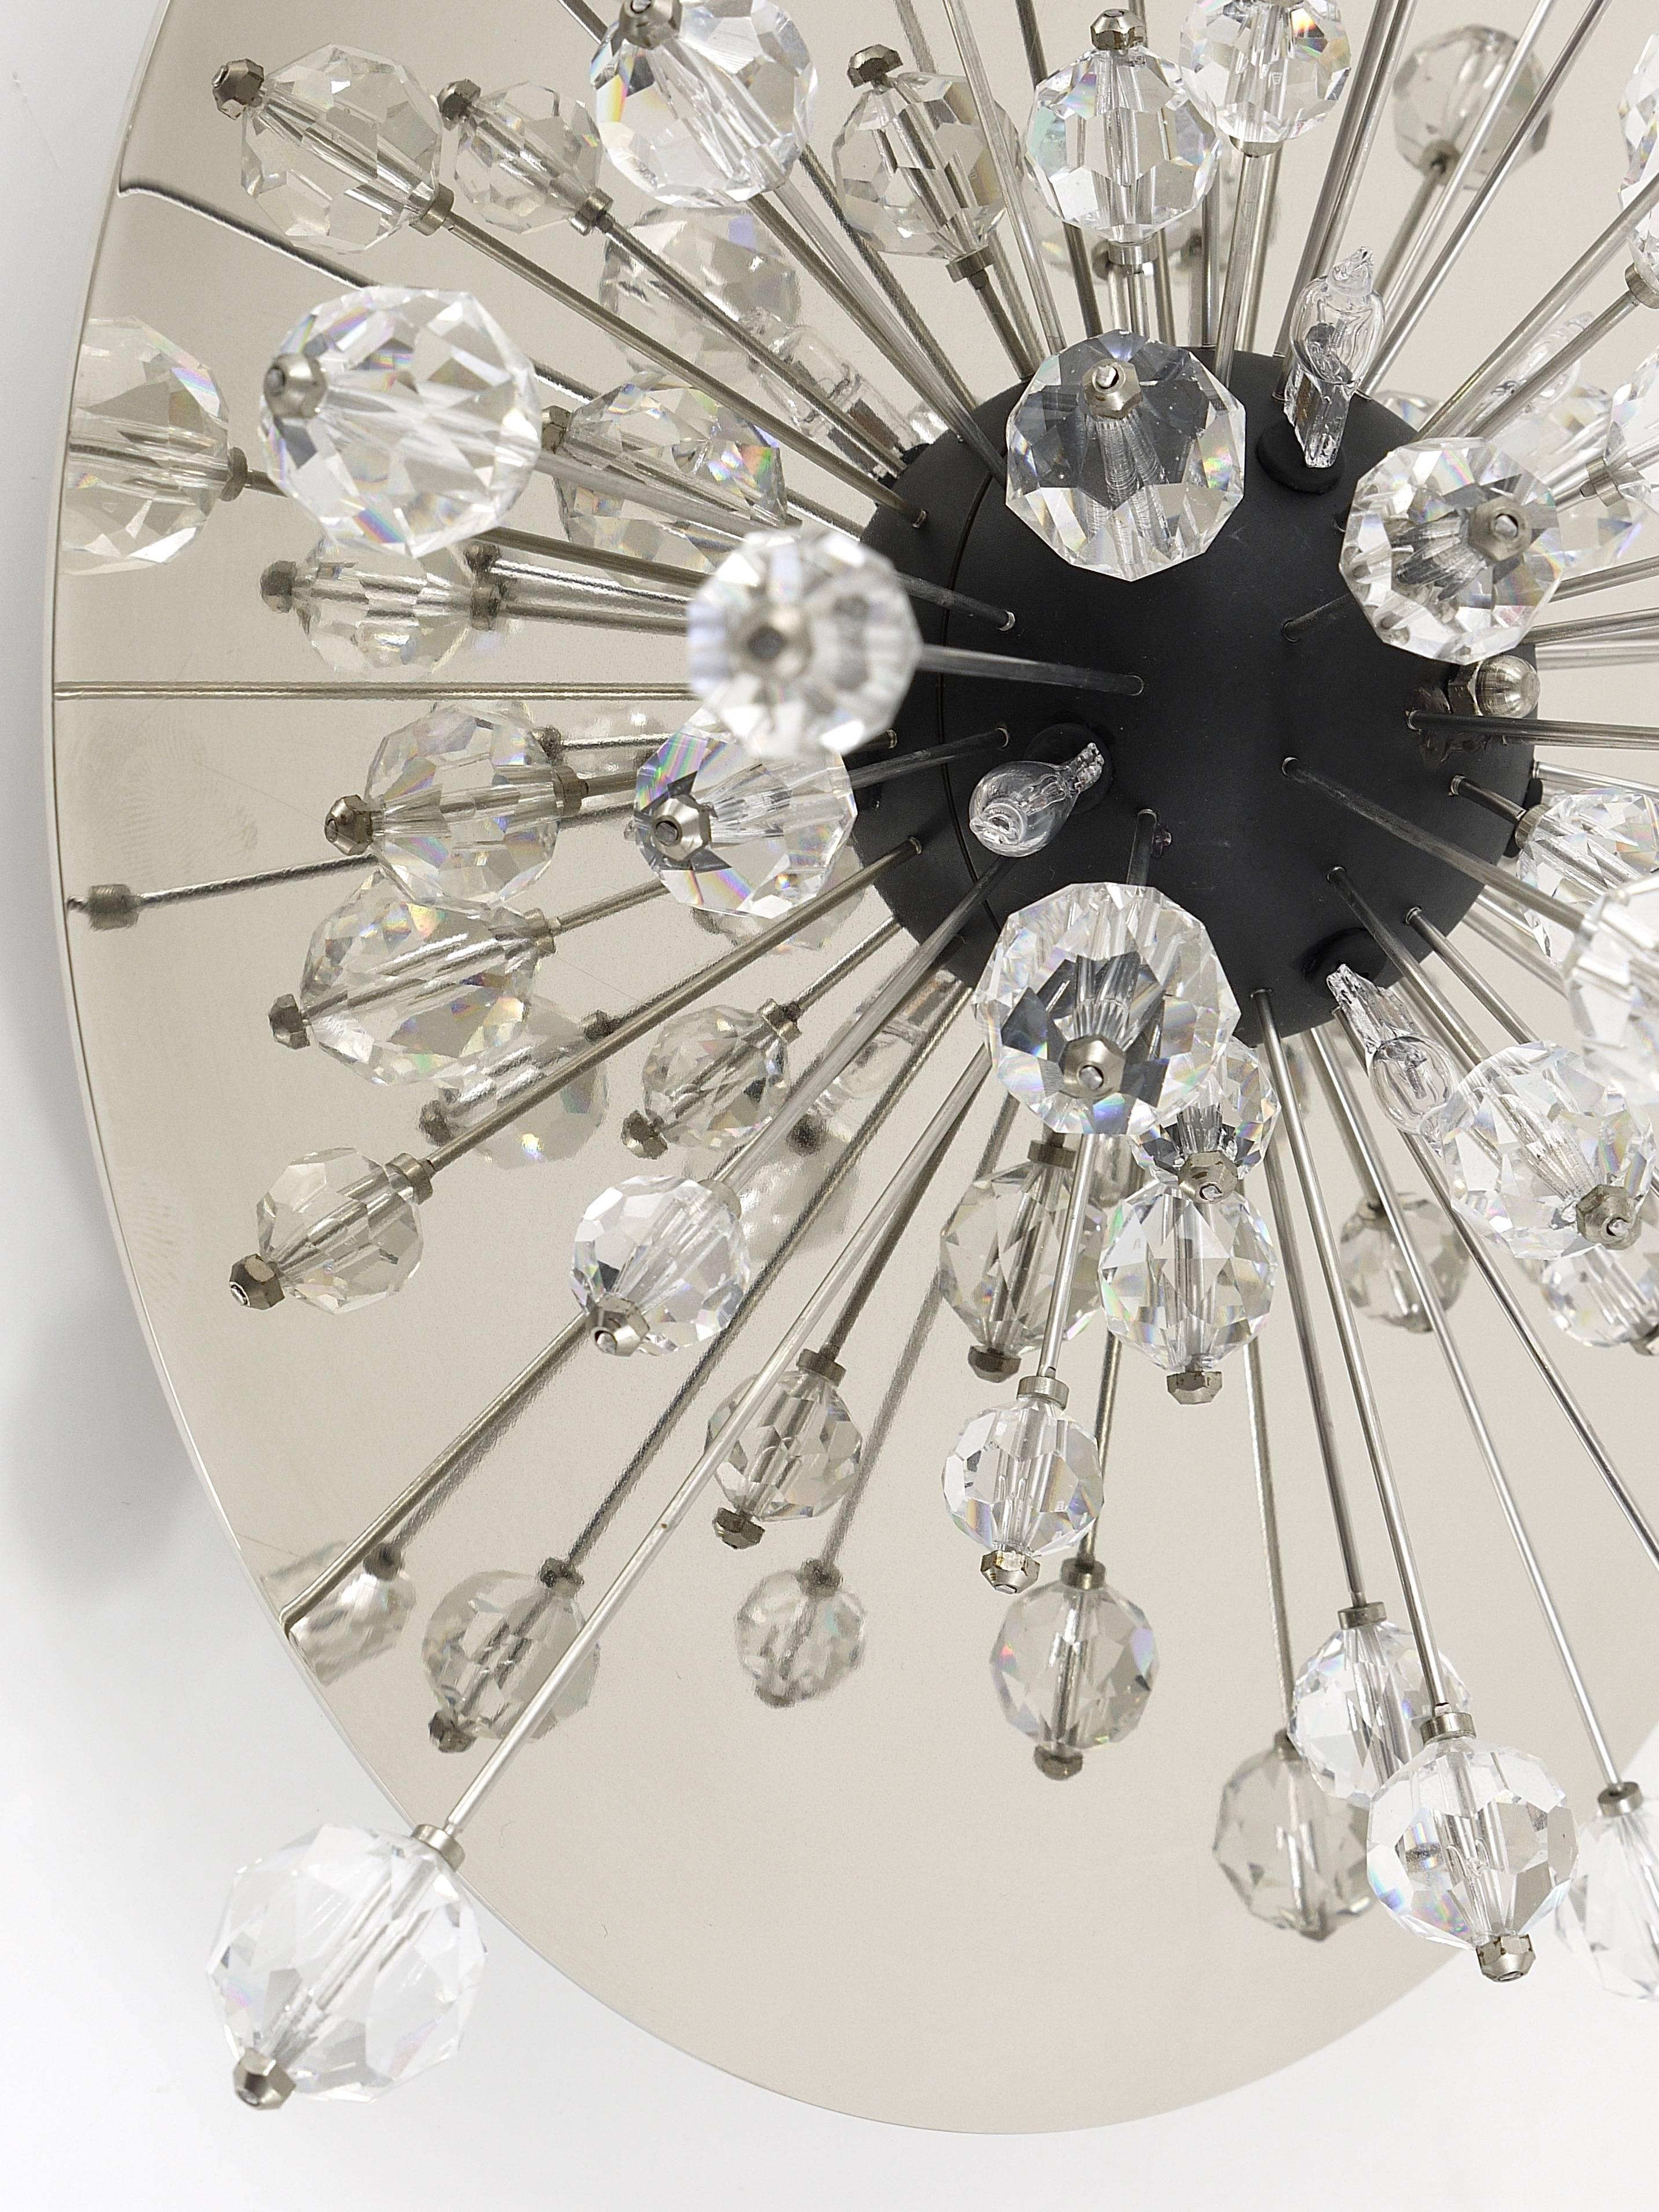 Up to two custom-made Mid-Century met Sputnik lights, designed and executed by J. & L. Lobmeyr, Austria. To be used as wall lights or ceiling lights. Each light has a round nickel-plated, mirror-finished backplate and rays covered with Swarovski